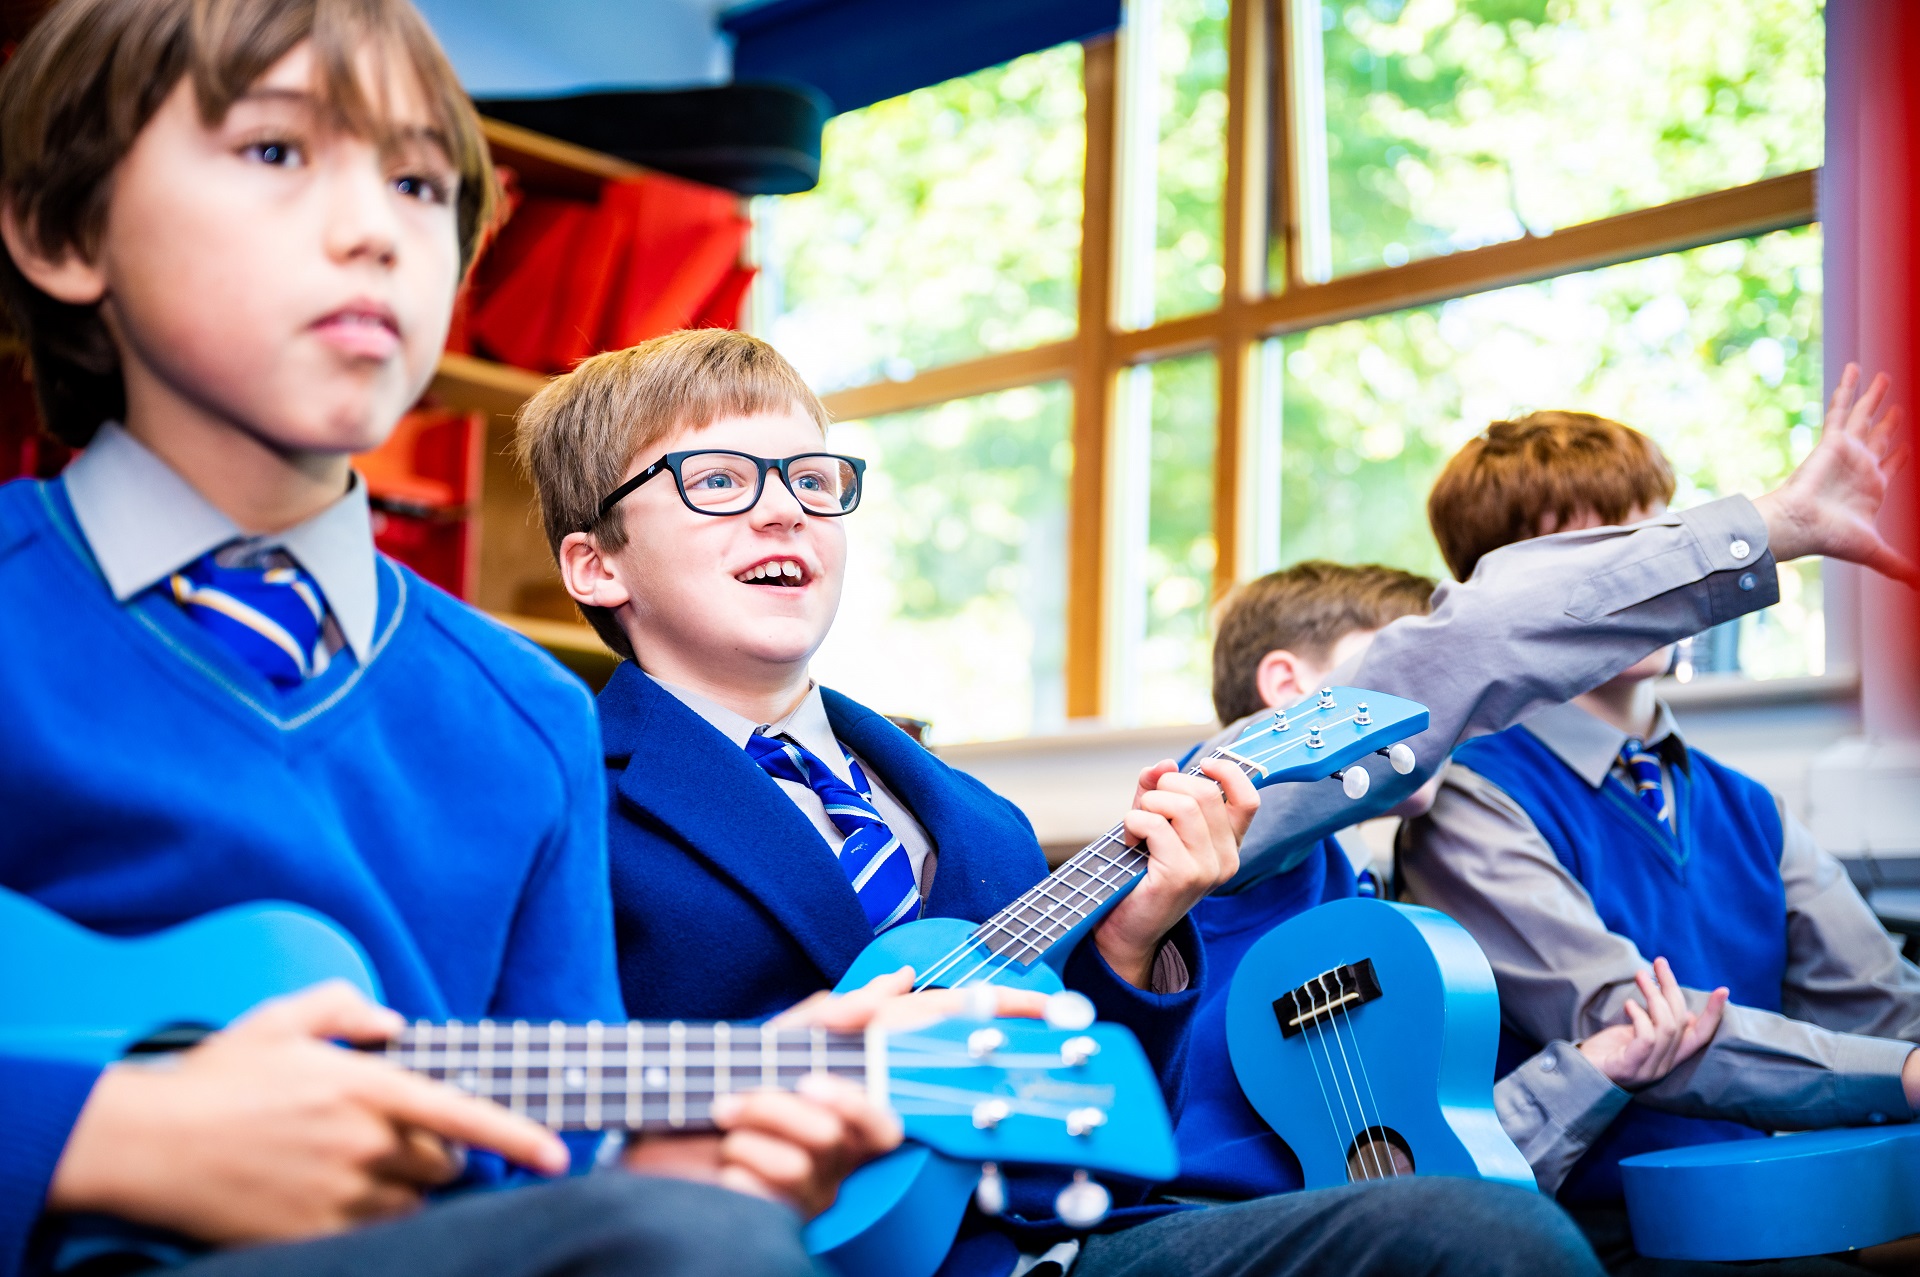 Pupils sit in a music lesson wearing a blue school uniform. They are playing on guitars. The child in focus in the image has brown hair and is wearing glasses, smiling and looking at the teacher.